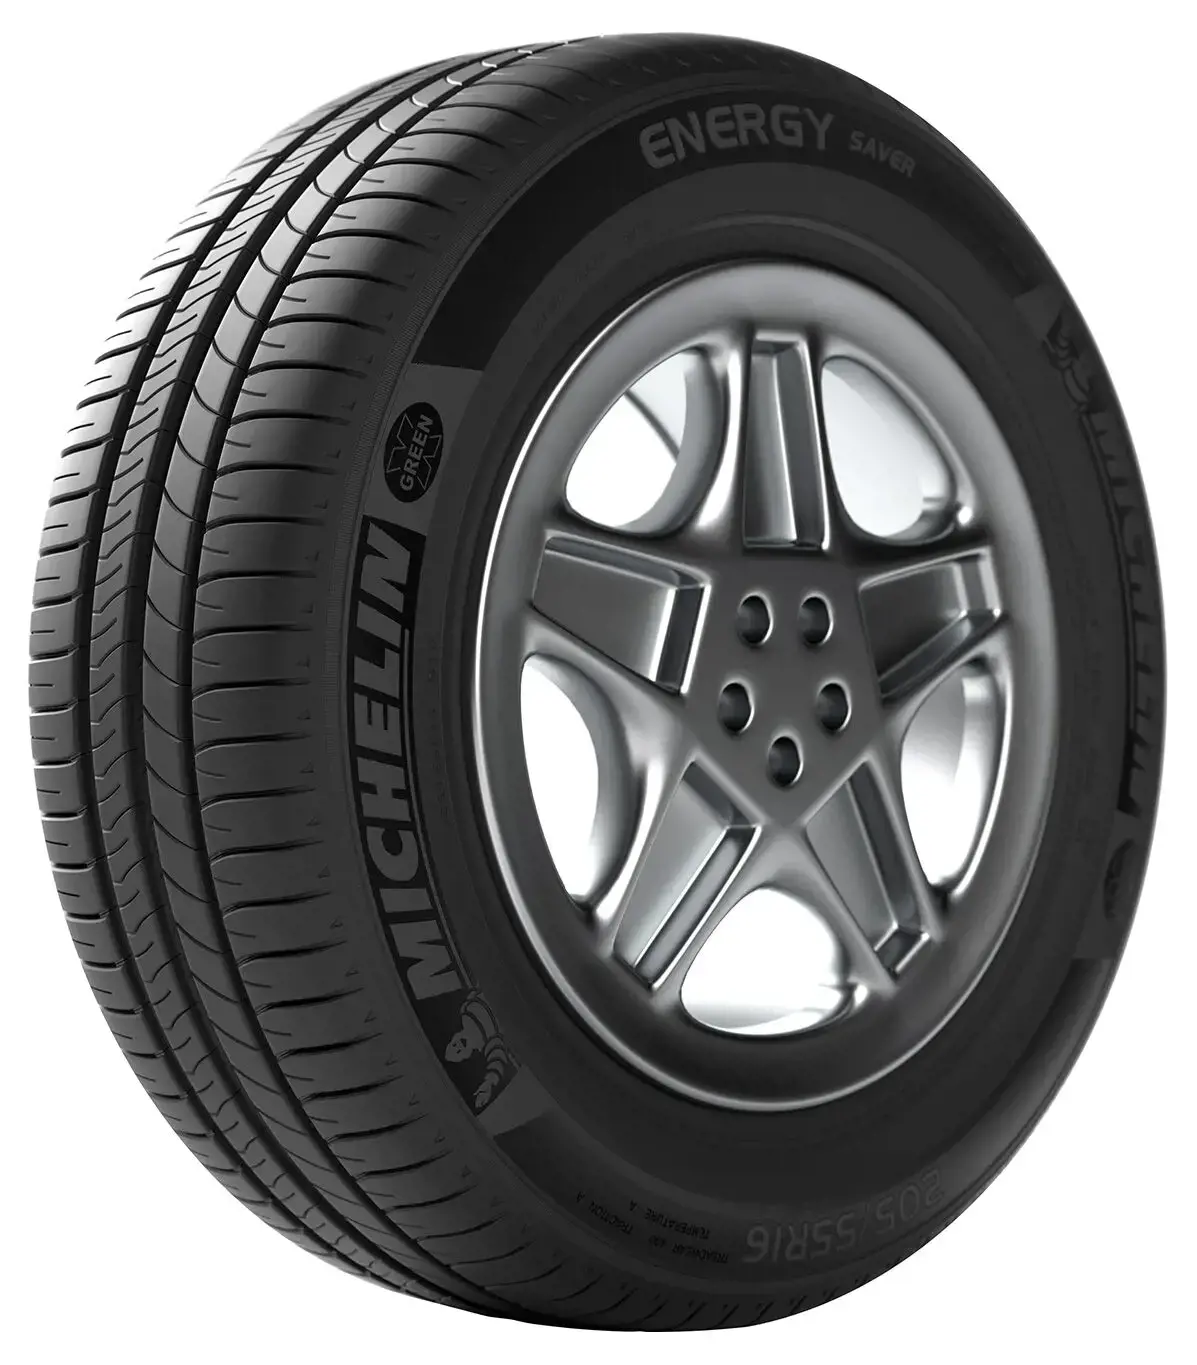 Weiland Reproduceren Extremisten MICHELIN Energy Saver + 205/60 R16 96H | rubbex.com